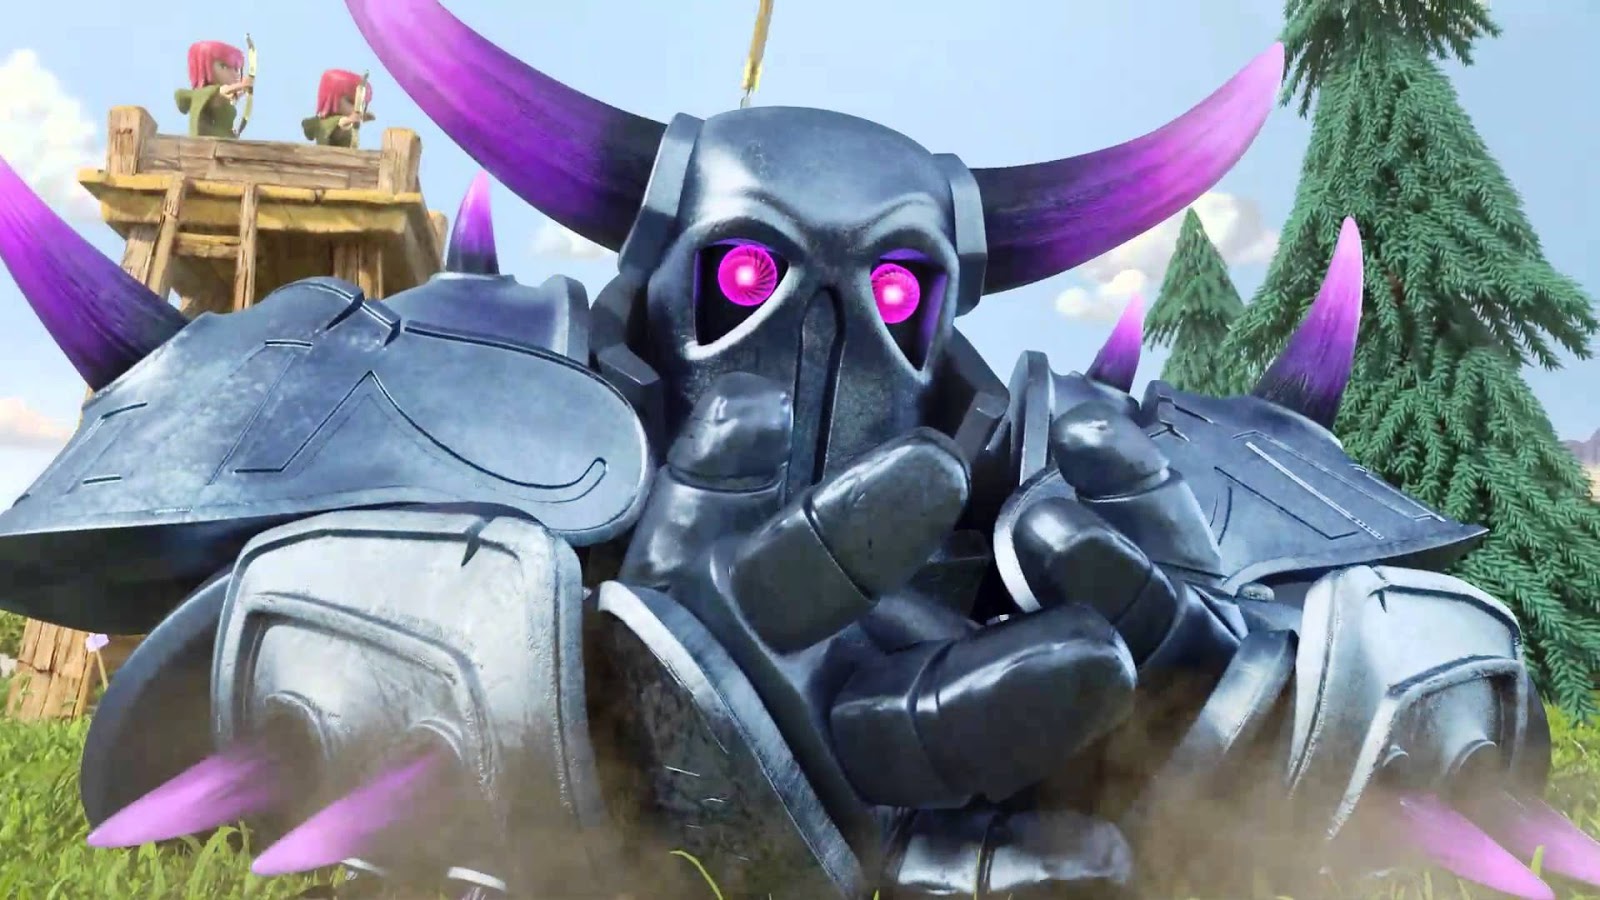 clash of clans pekka wallpaper,fictional character,animated cartoon,animation,massively multiplayer online role playing game,screenshot